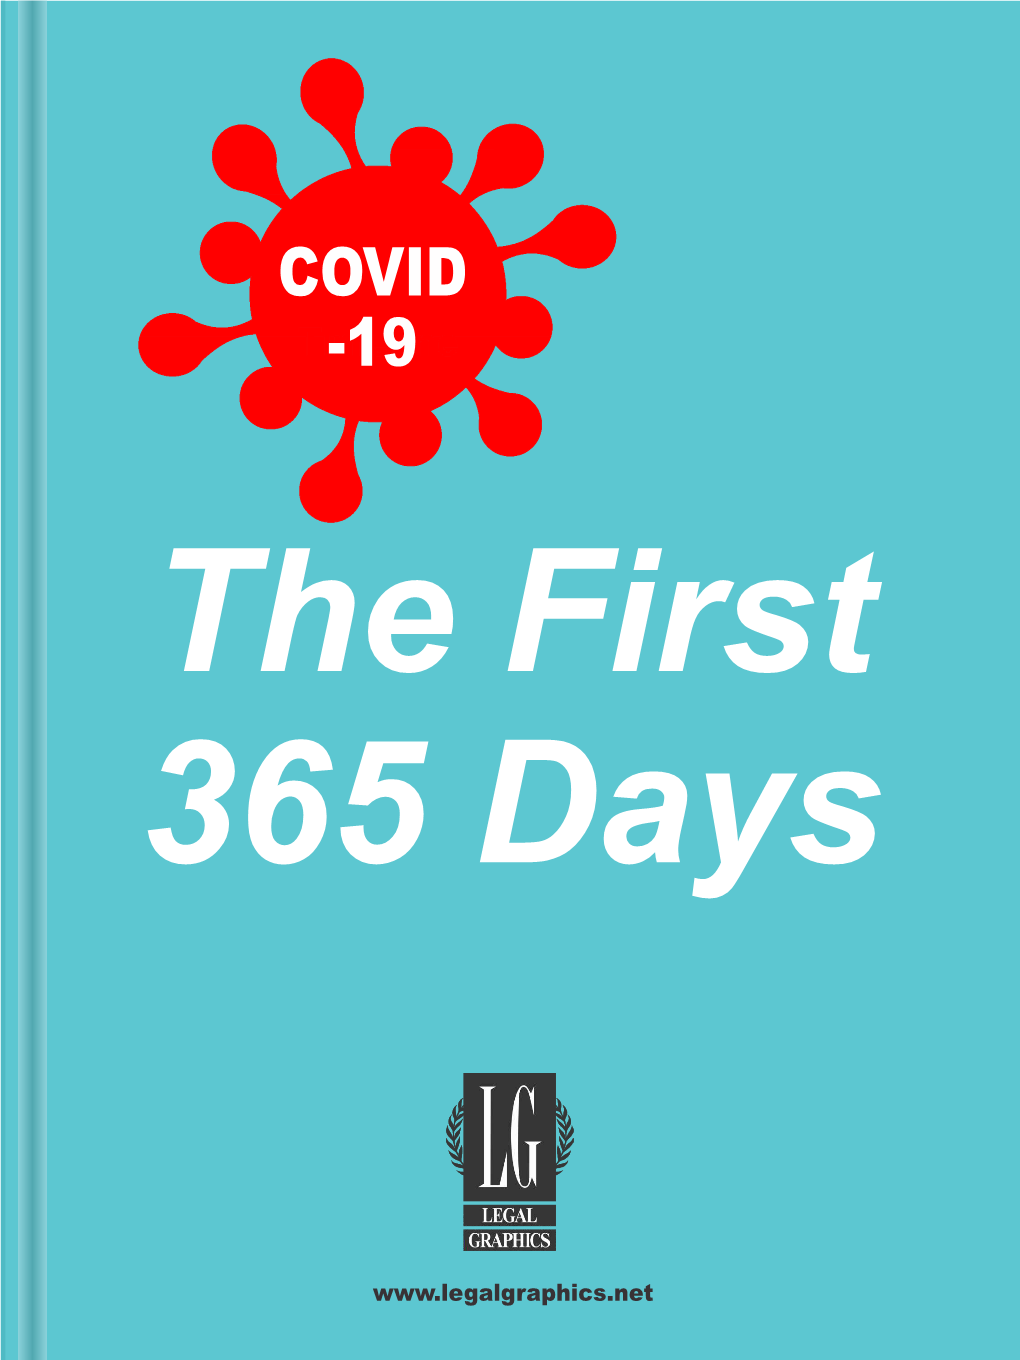 COVID -19 the First 365 Days